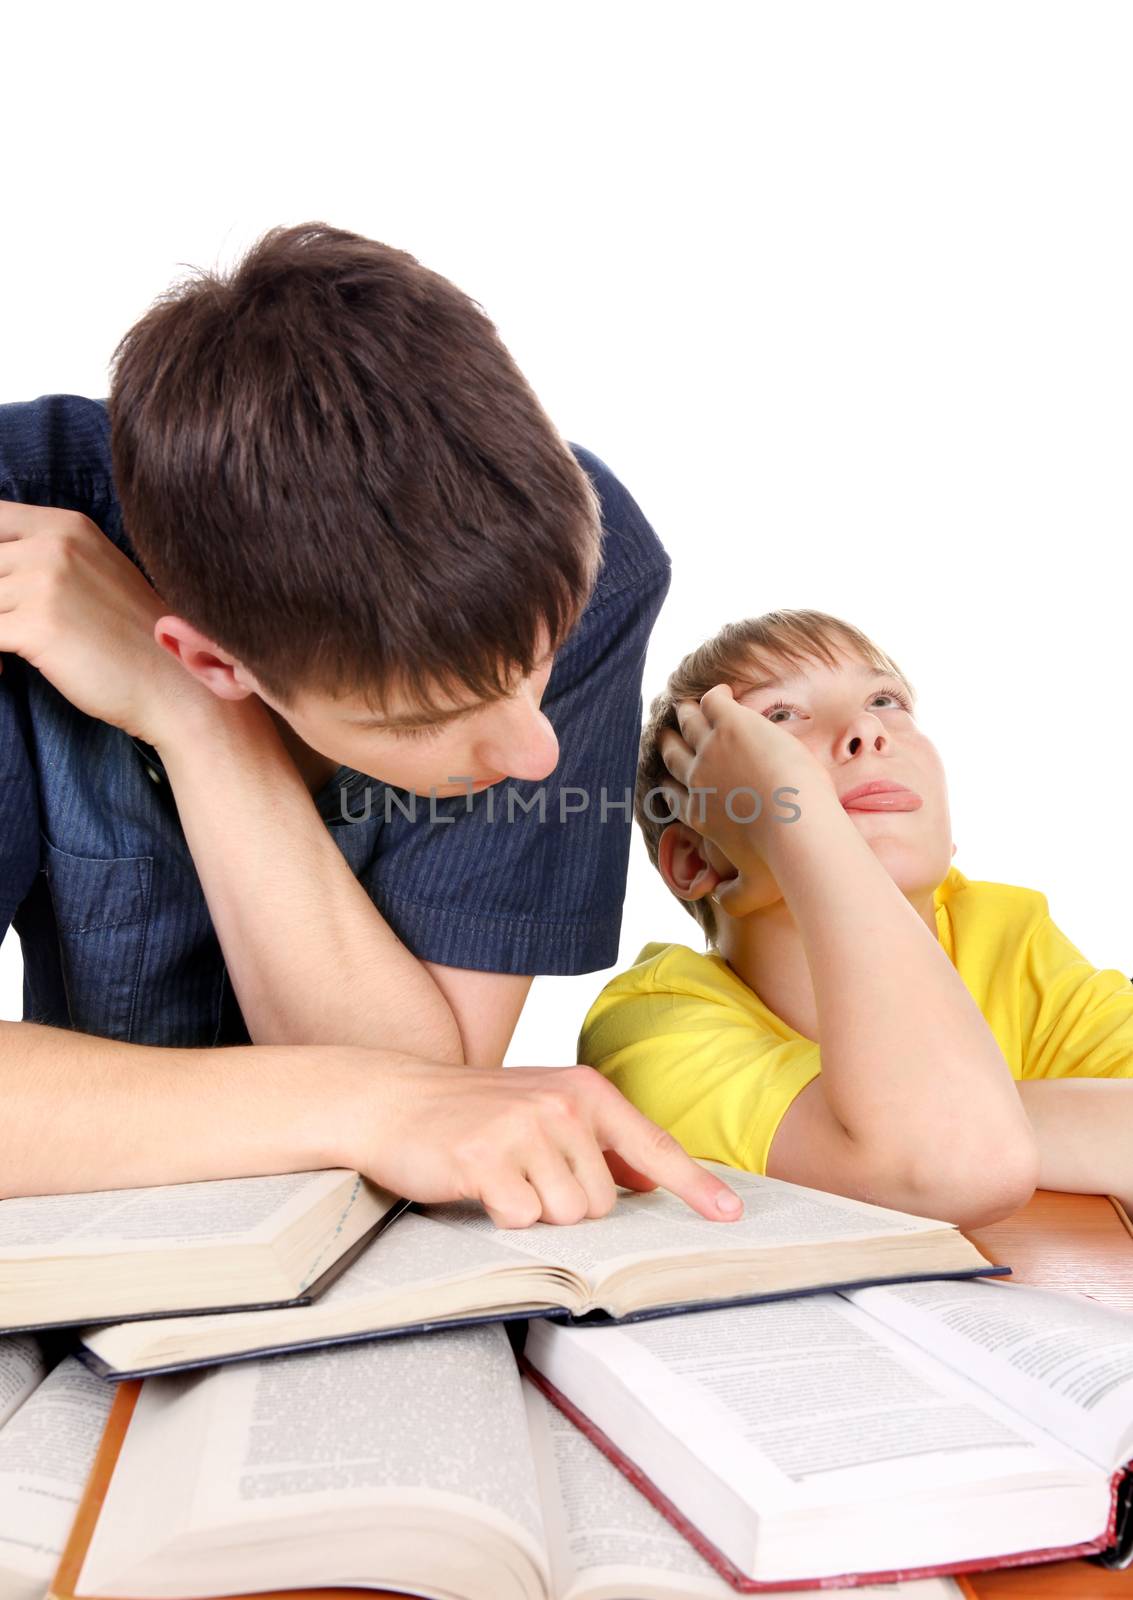 Older Brother and Annoyed Kid on the School Desk on the white background